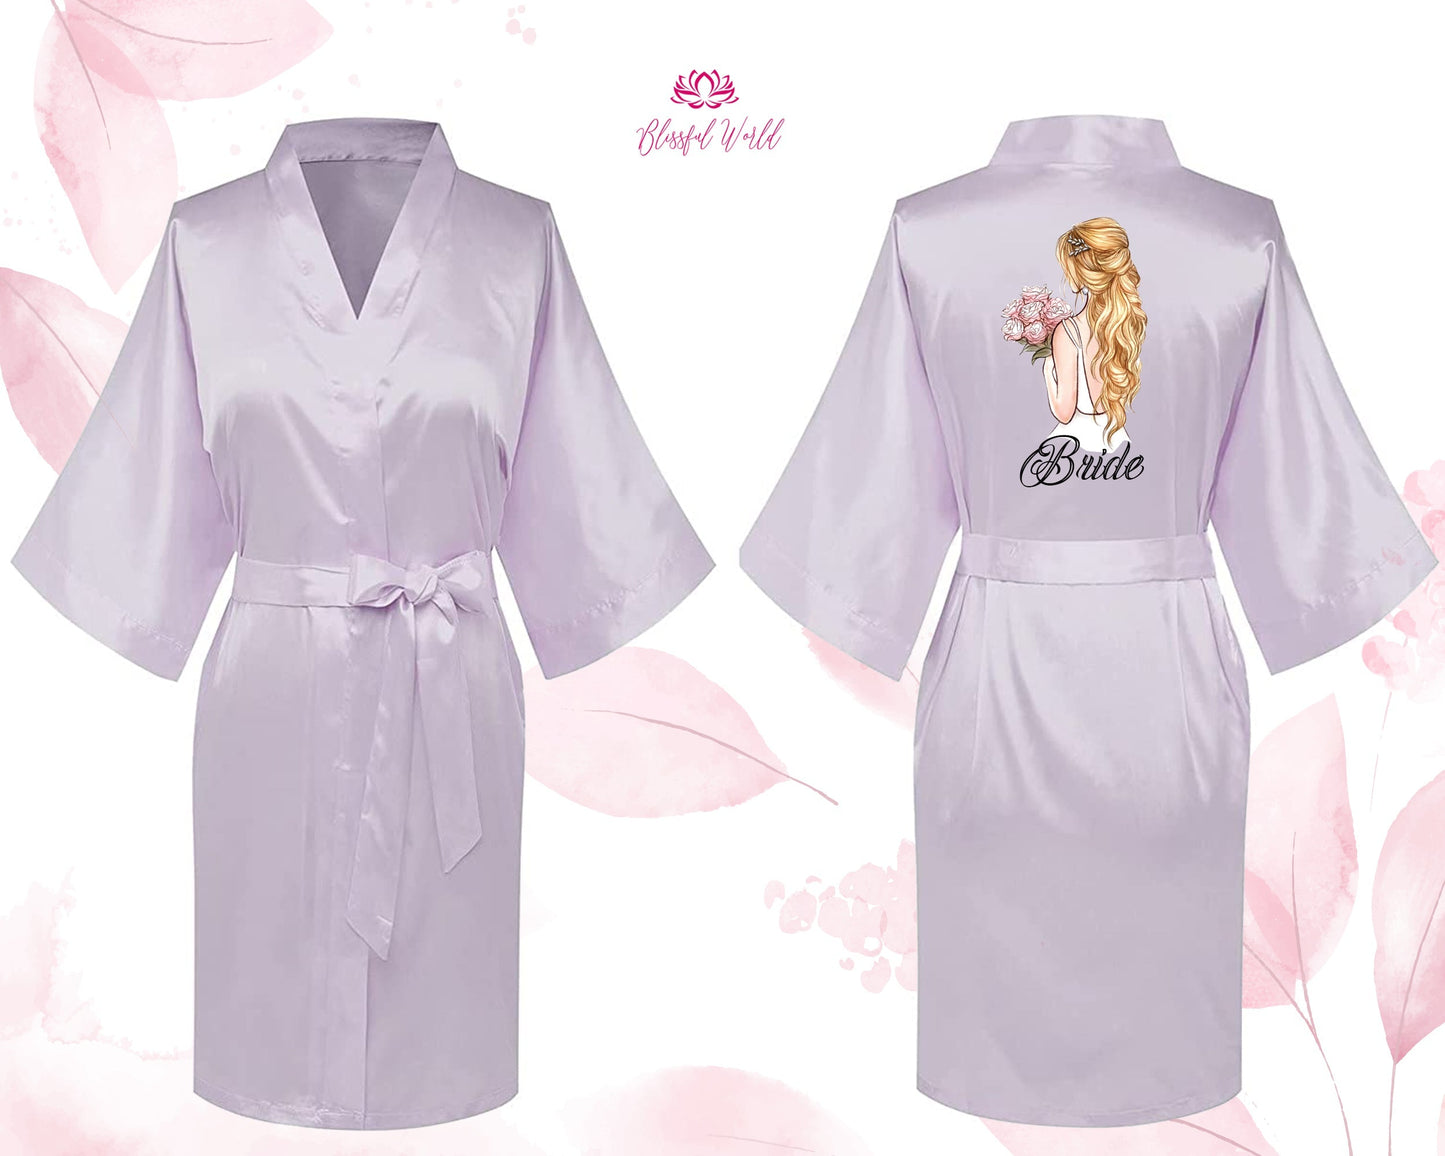 Bridal Robe, Lace Robe, Wedding Dressing Gown, Floral Bridal Robes, Satin Wedding Robe, Wedding Robe